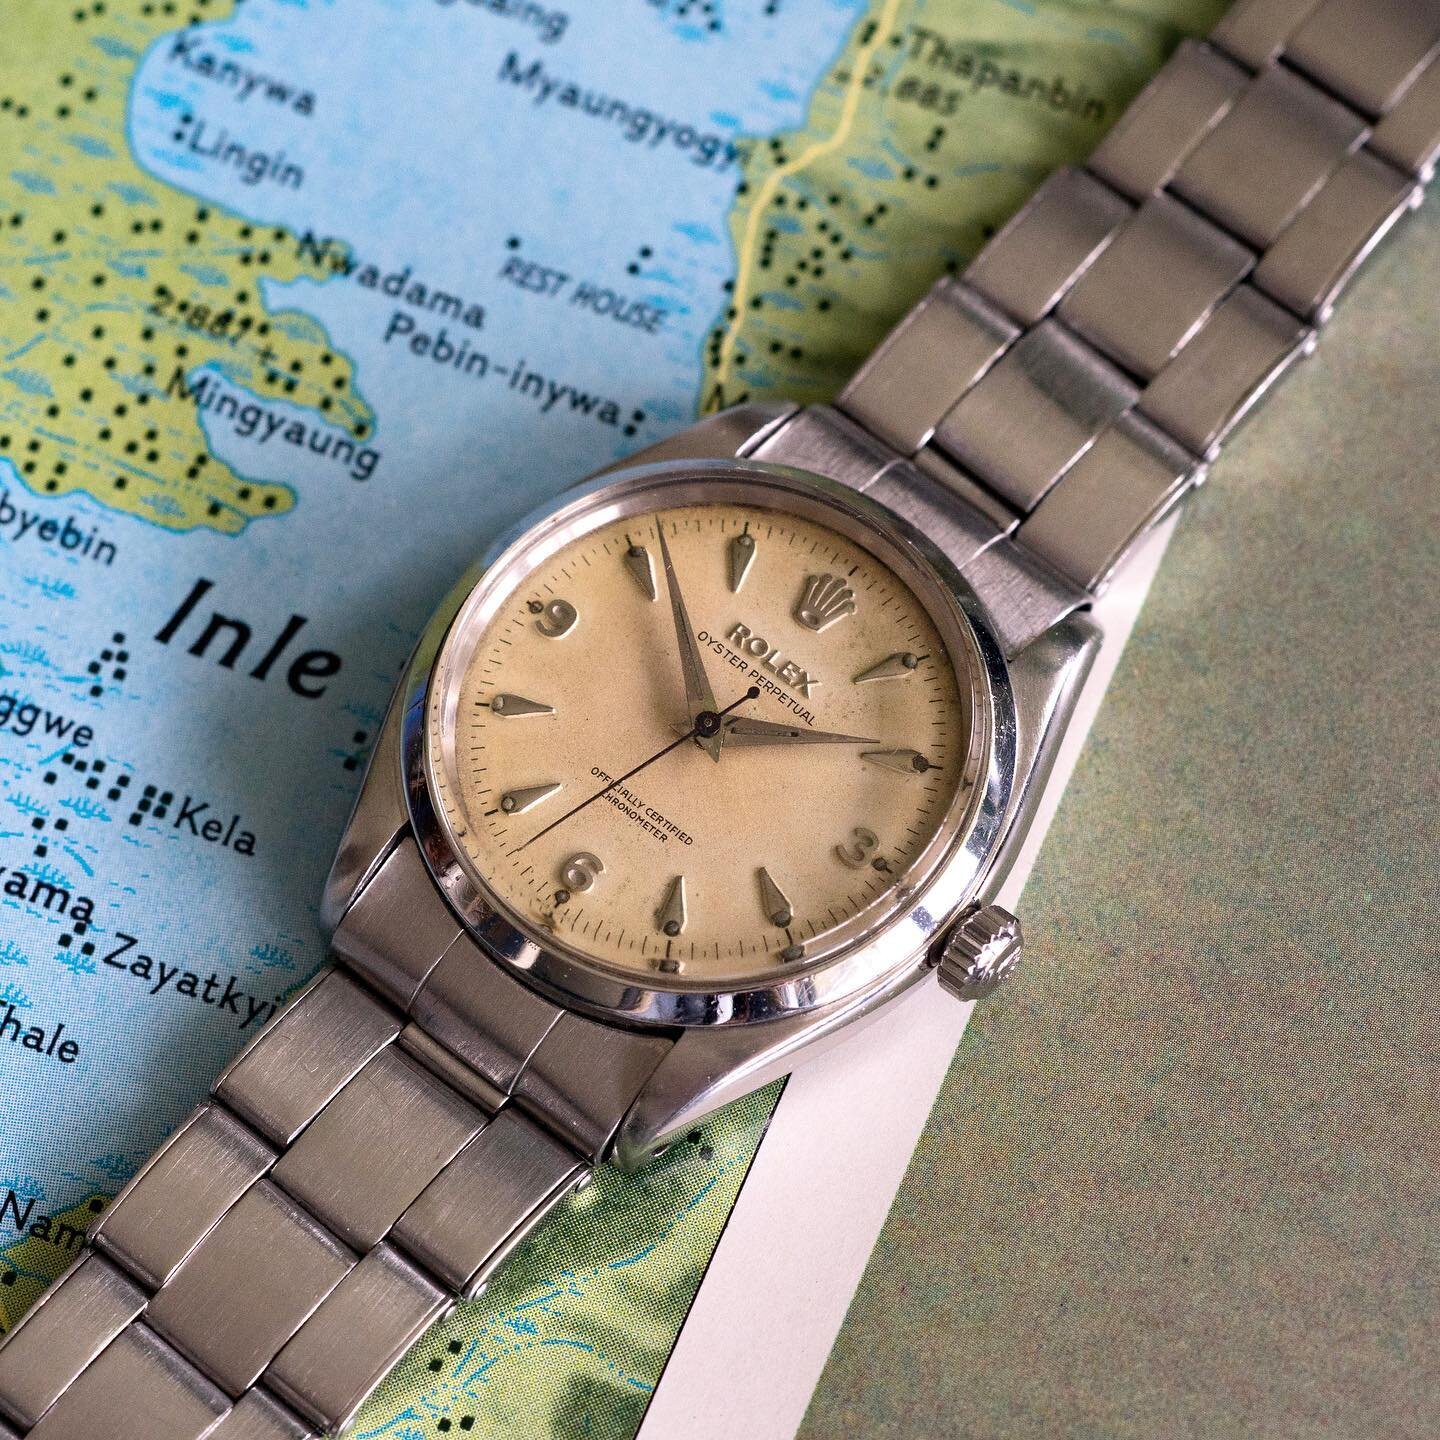 [💲For Sale - Ticking all the Rolex boxes]

Rolex Oyster Perpetual Chronometer Ref. 6564 &quot;Explorer&quot;. The great 34mm Oyster case in steel. 

The watch that ticks all the Rolex boxes. 34mm steel Oyster case? Yes! Correct Rolex Oyster riveted 